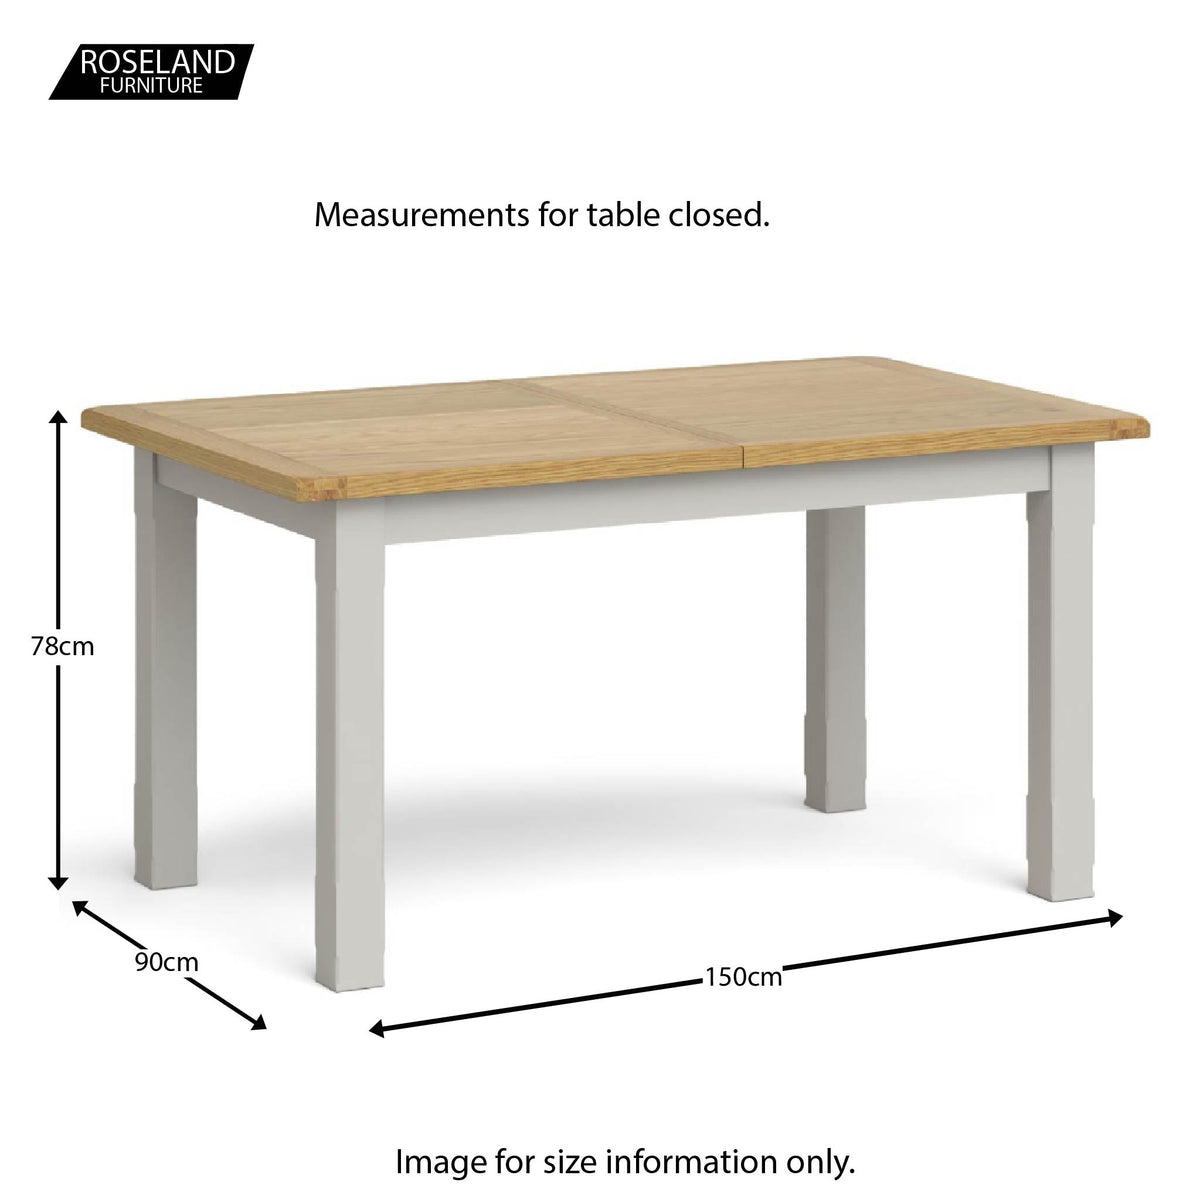 Lundy Grey Small Extending Oak Topped Dining Table - Closed size guide